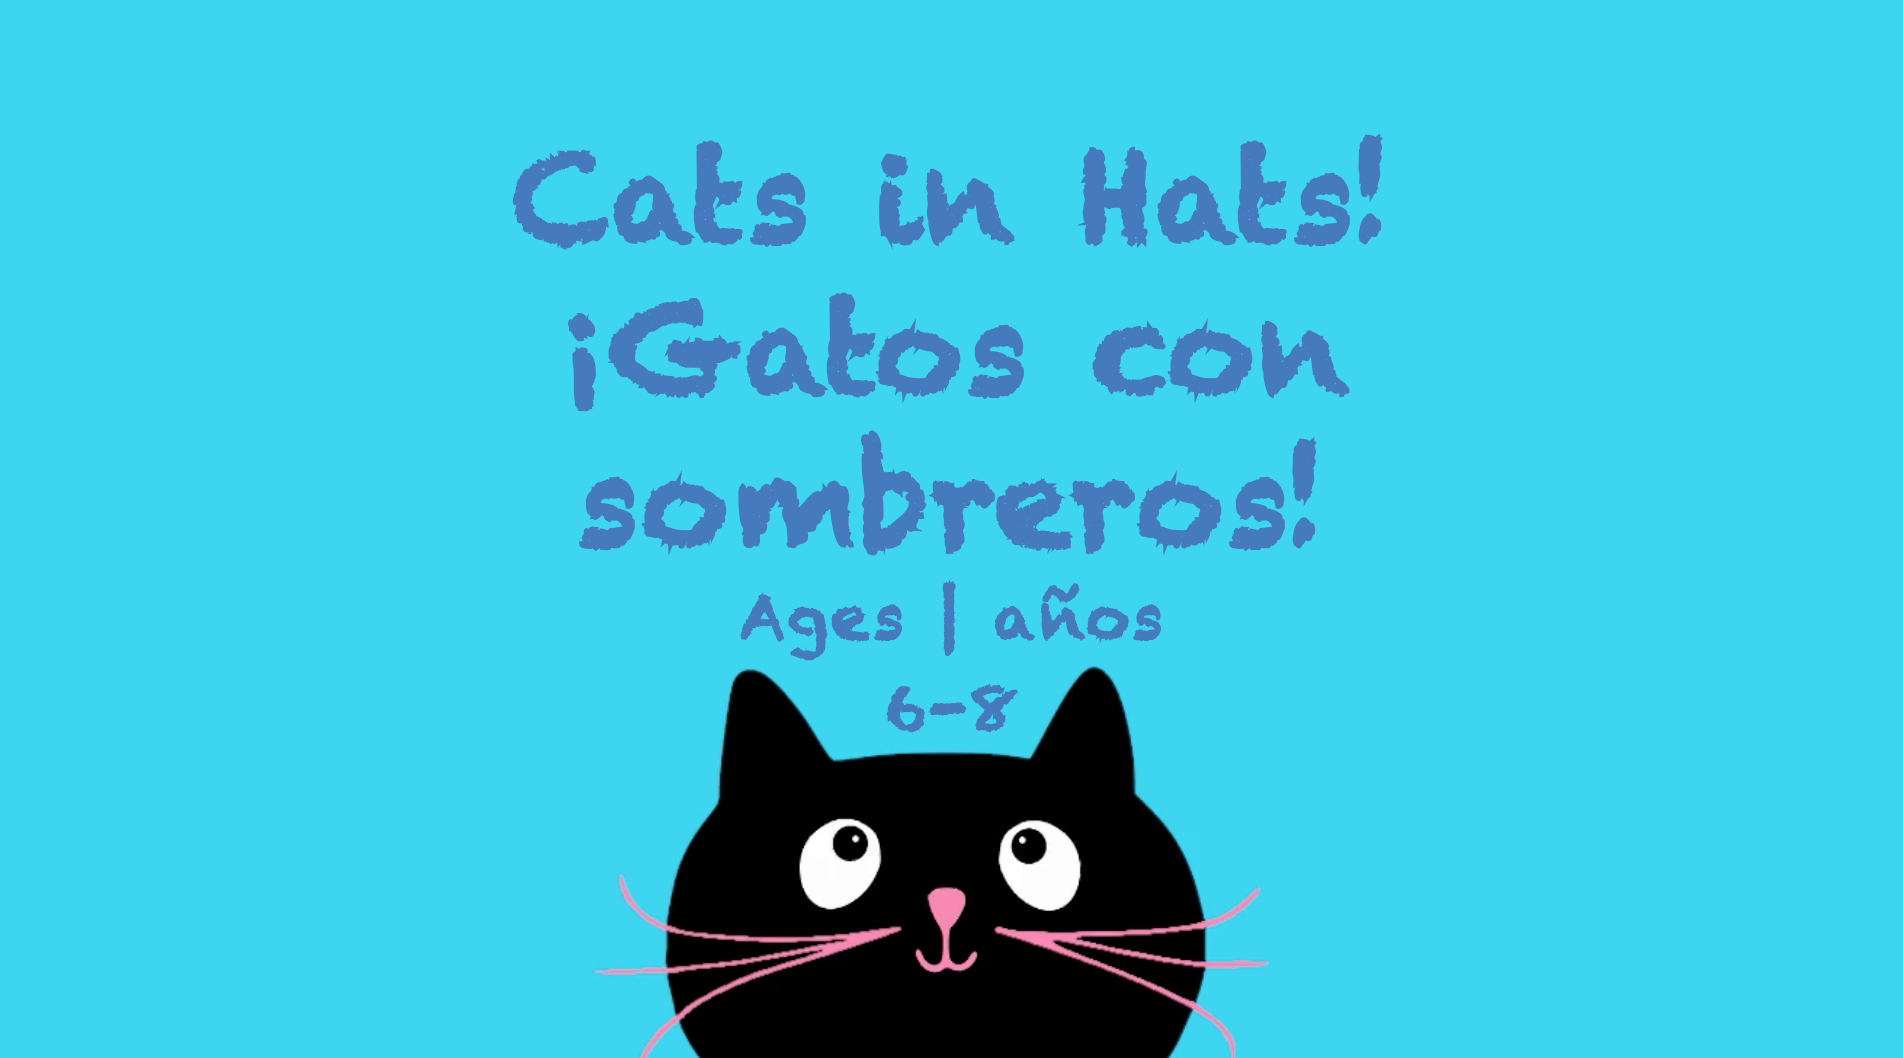 Week 30 Cats in Hats Card Ages 6-8